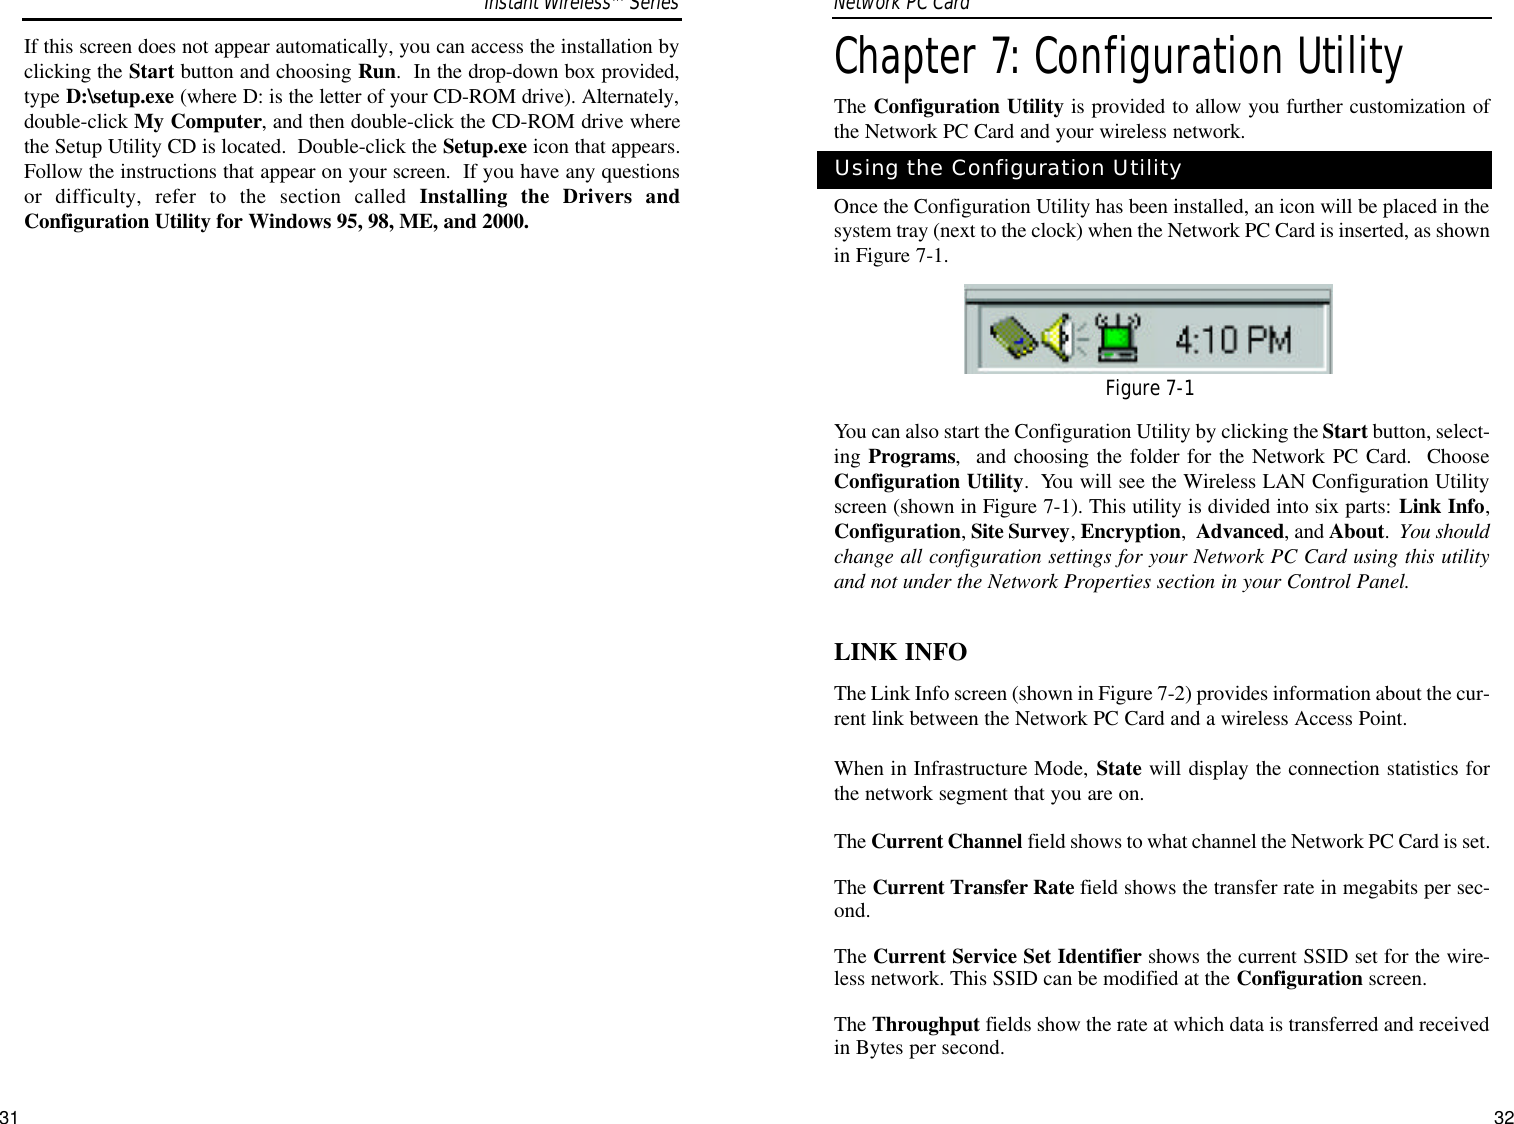 32Chapter 7: Configuration UtilityThe Configuration Utility is provided to allow you further customization ofthe Network PC Card and your wireless network.Once the Configuration Utility has been installed, an icon will be placed in thesystem tray (next to the clock) when the Network PC Card is inserted, as shownin Figure 7-1. You can also start the Configuration Utility by clicking the Start button, select-ing Programs,  and choosing the folder for the Network PC Card.  ChooseConfiguration Utility.  You will see the Wireless LAN Configuration Utilityscreen (shown in Figure 7-1). This utility is divided into six parts: Link Info,Configuration, Site Survey, Encryption,  Advanced, and About.  You shouldchange all configuration settings for your Network PC Card using this utilityand not under the Network Properties section in your Control Panel.LINK INFOThe Link Info screen (shown in Figure 7-2) provides information about the cur-rent link between the Network PC Card and a wireless Access Point.When in Infrastructure Mode, State will display the connection statistics forthe network segment that you are on.The Current Channel field shows to what channel the Network PC Card is set.The Current Transfer Rate field shows the transfer rate in megabits per sec-ond.The Current Service Set Identifier shows the current SSID set for the wire-less network. This SSID can be modified at the Configuration screen.The Throughput fields show the rate at which data is transferred and receivedin Bytes per second.Using the Configuration UtilityFigure 7-1If this screen does not appear automatically, you can access the installation byclicking the Start button and choosing Run.  In the drop-down box provided,type D:\setup.exe (where D: is the letter of your CD-ROM drive). Alternately,double-click My Computer, and then double-click the CD-ROM drive wherethe Setup Utility CD is located.  Double-click the Setup.exe icon that appears.Follow the instructions that appear on your screen.  If you have any questionsor difficulty, refer to the section called Installing the Drivers andConfiguration Utility for Windows 95, 98, ME, and 2000.Network PC Card Instant WirelessTMSeries31